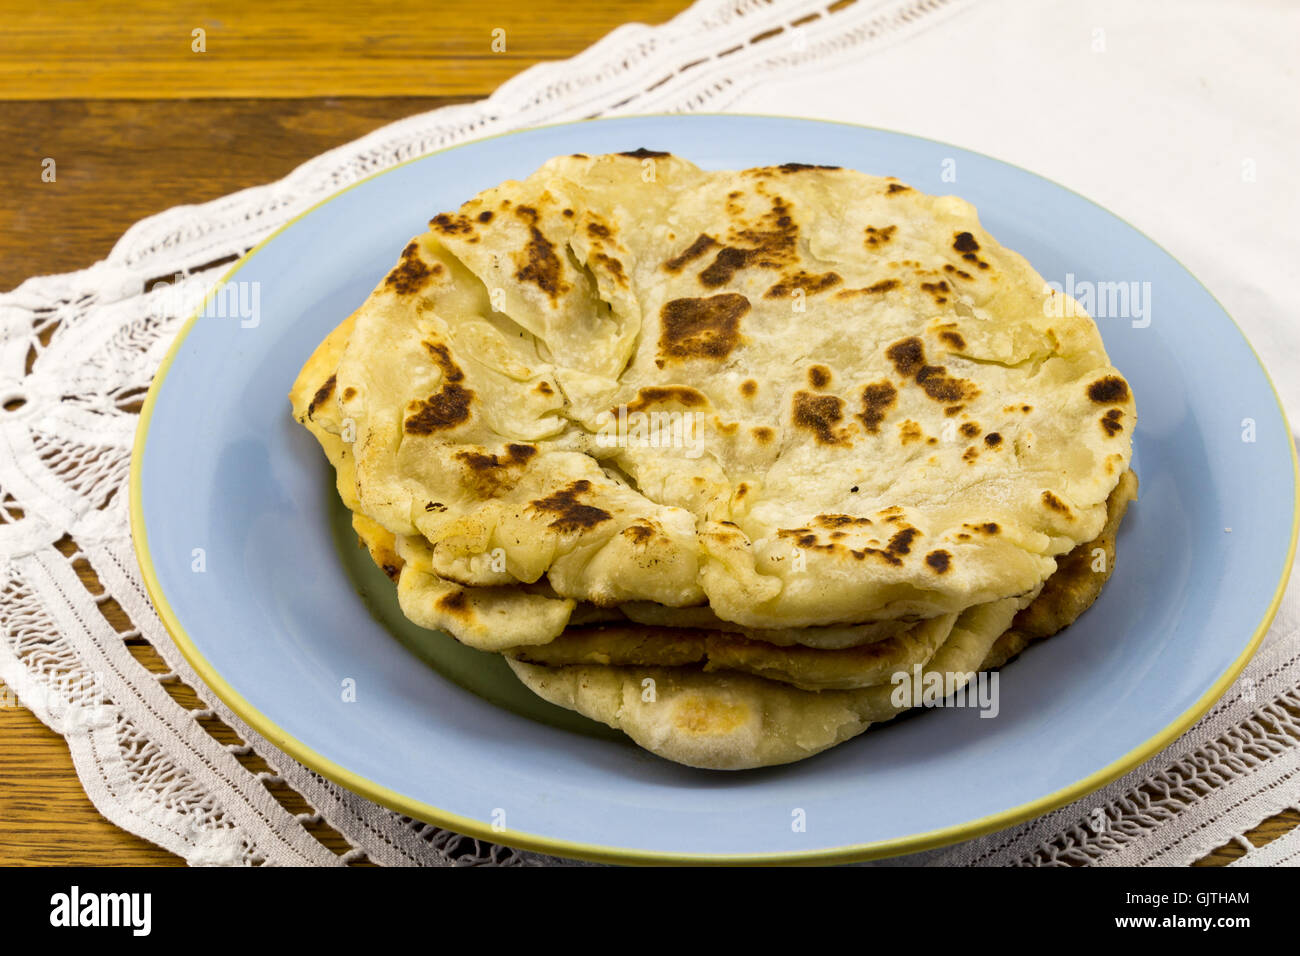 Indian roti flat breads in a plate close up Stock Photo